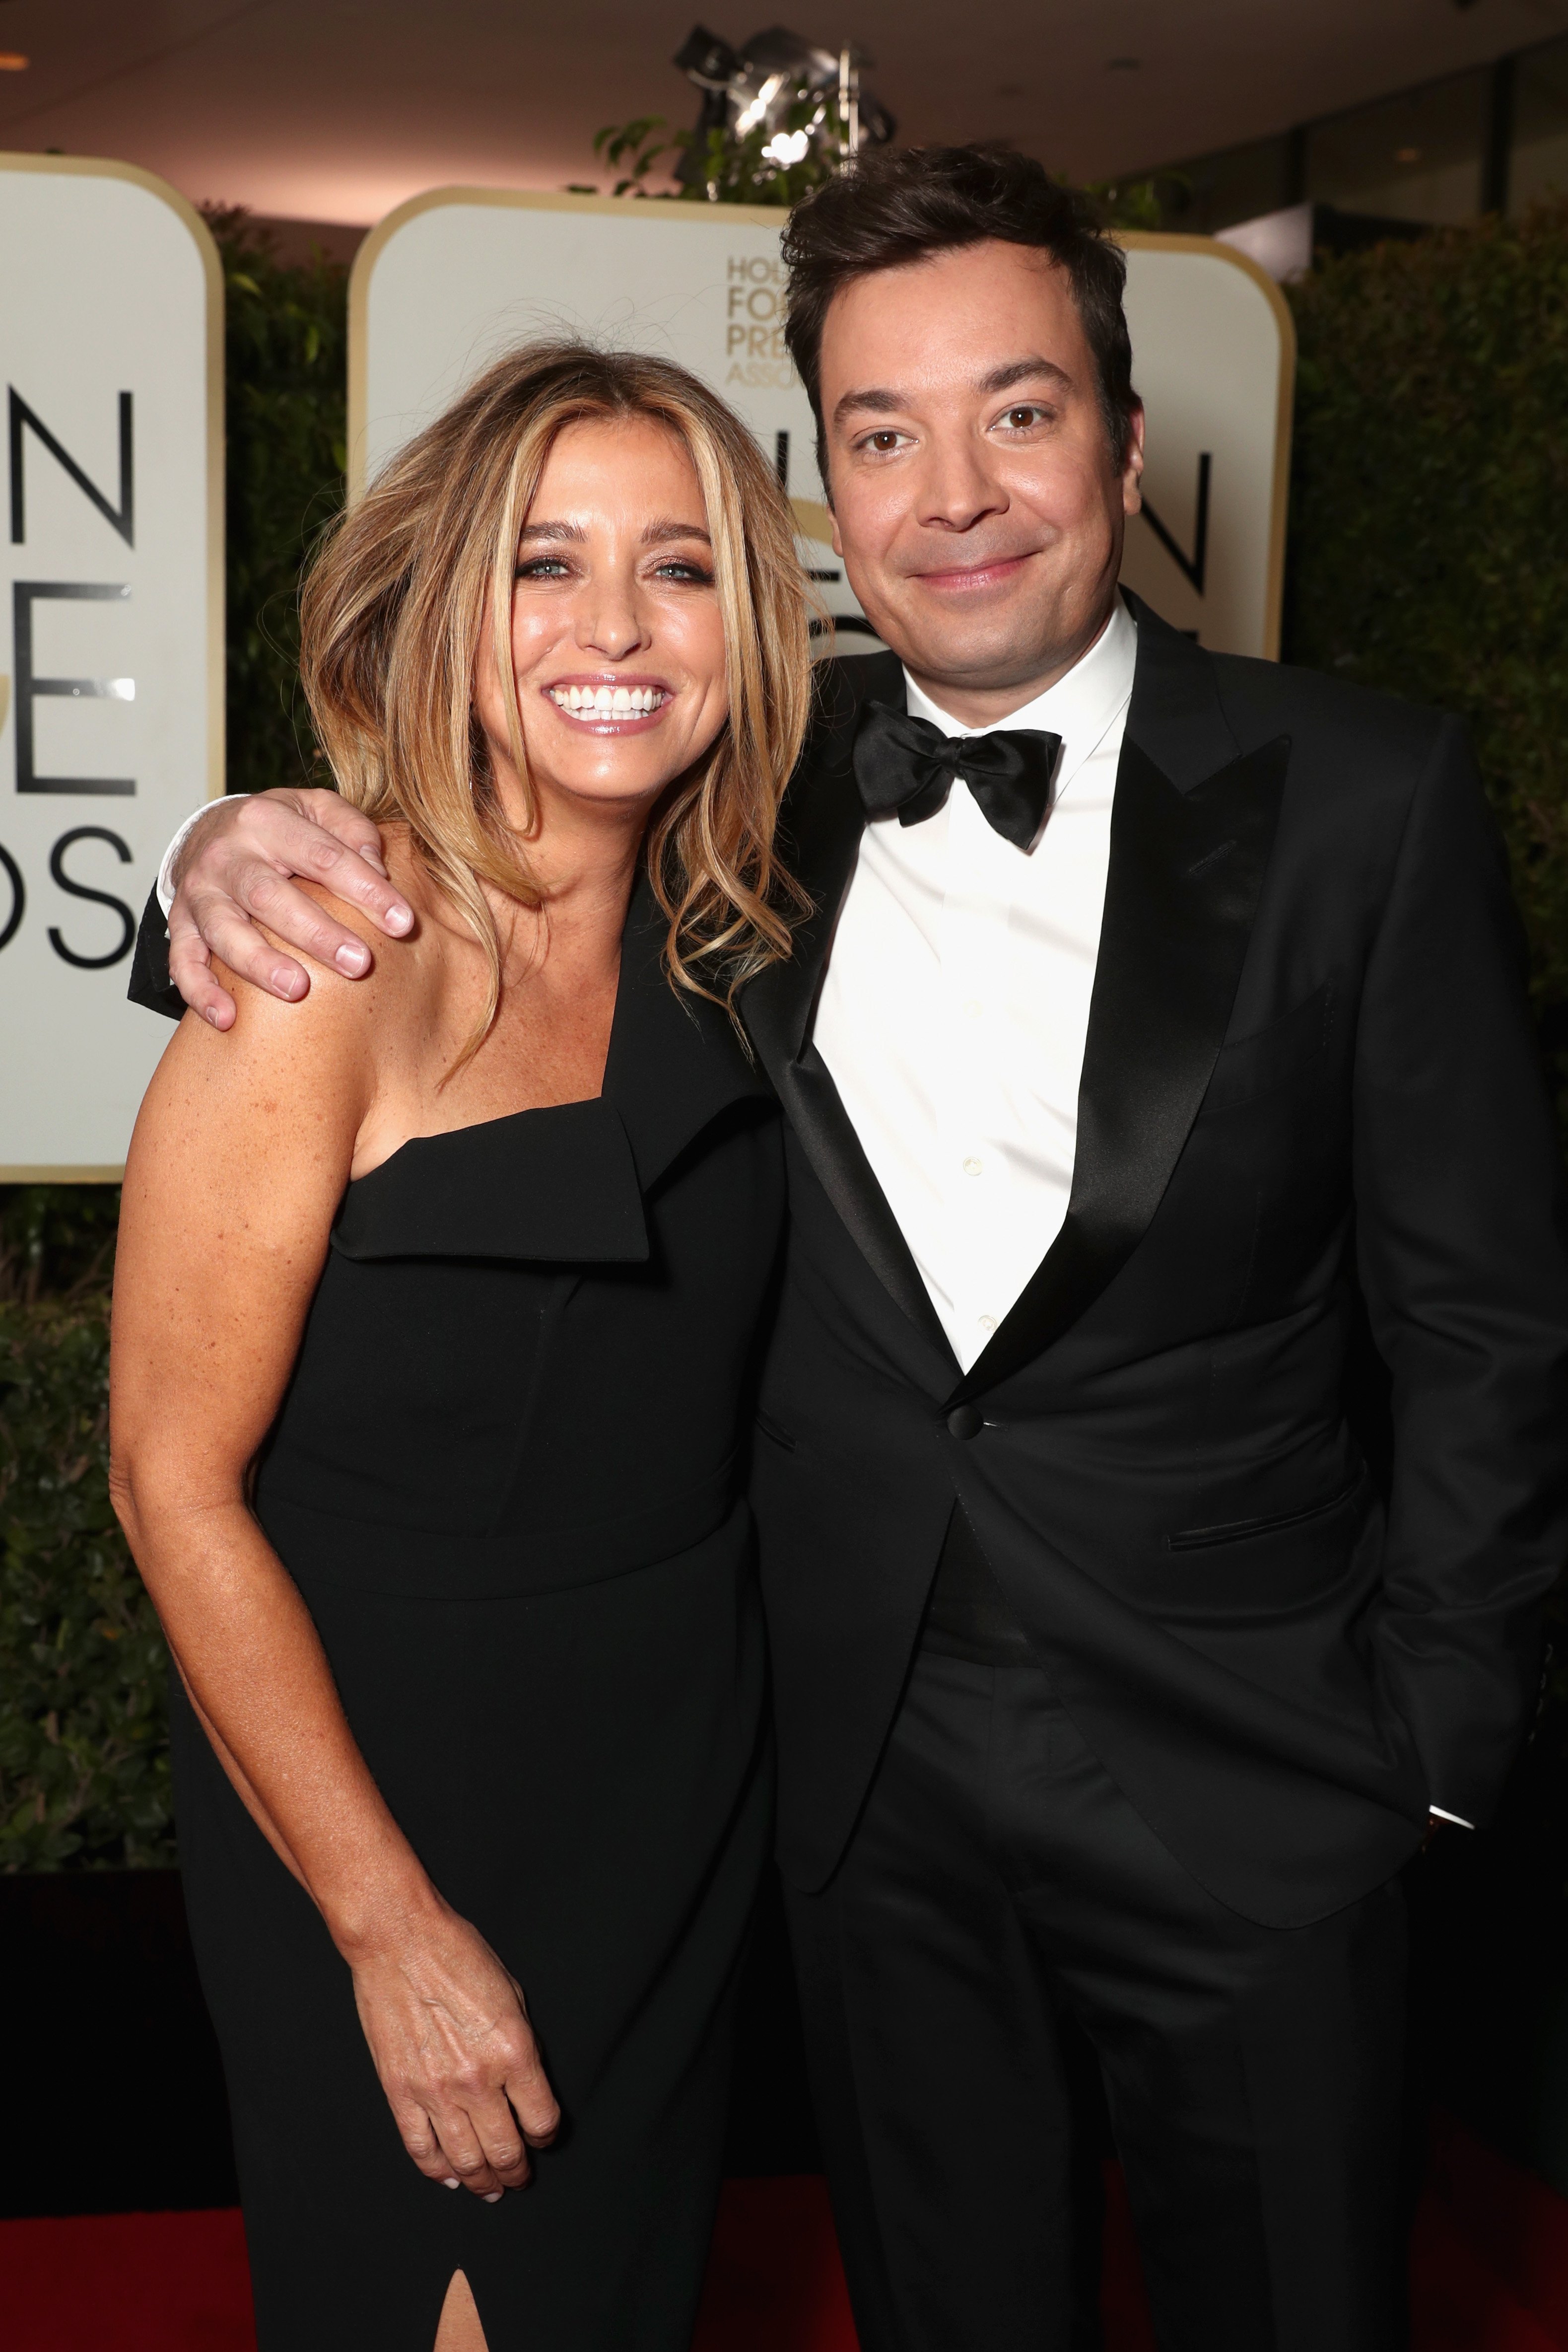 Nancy Juvonen and host Jimmy Fallon attends the 74th Annual Golden Globe Awards at The Beverly Hilton Hotel on January 8, 2017 in Beverly Hills, California. | Photo: GettyImages